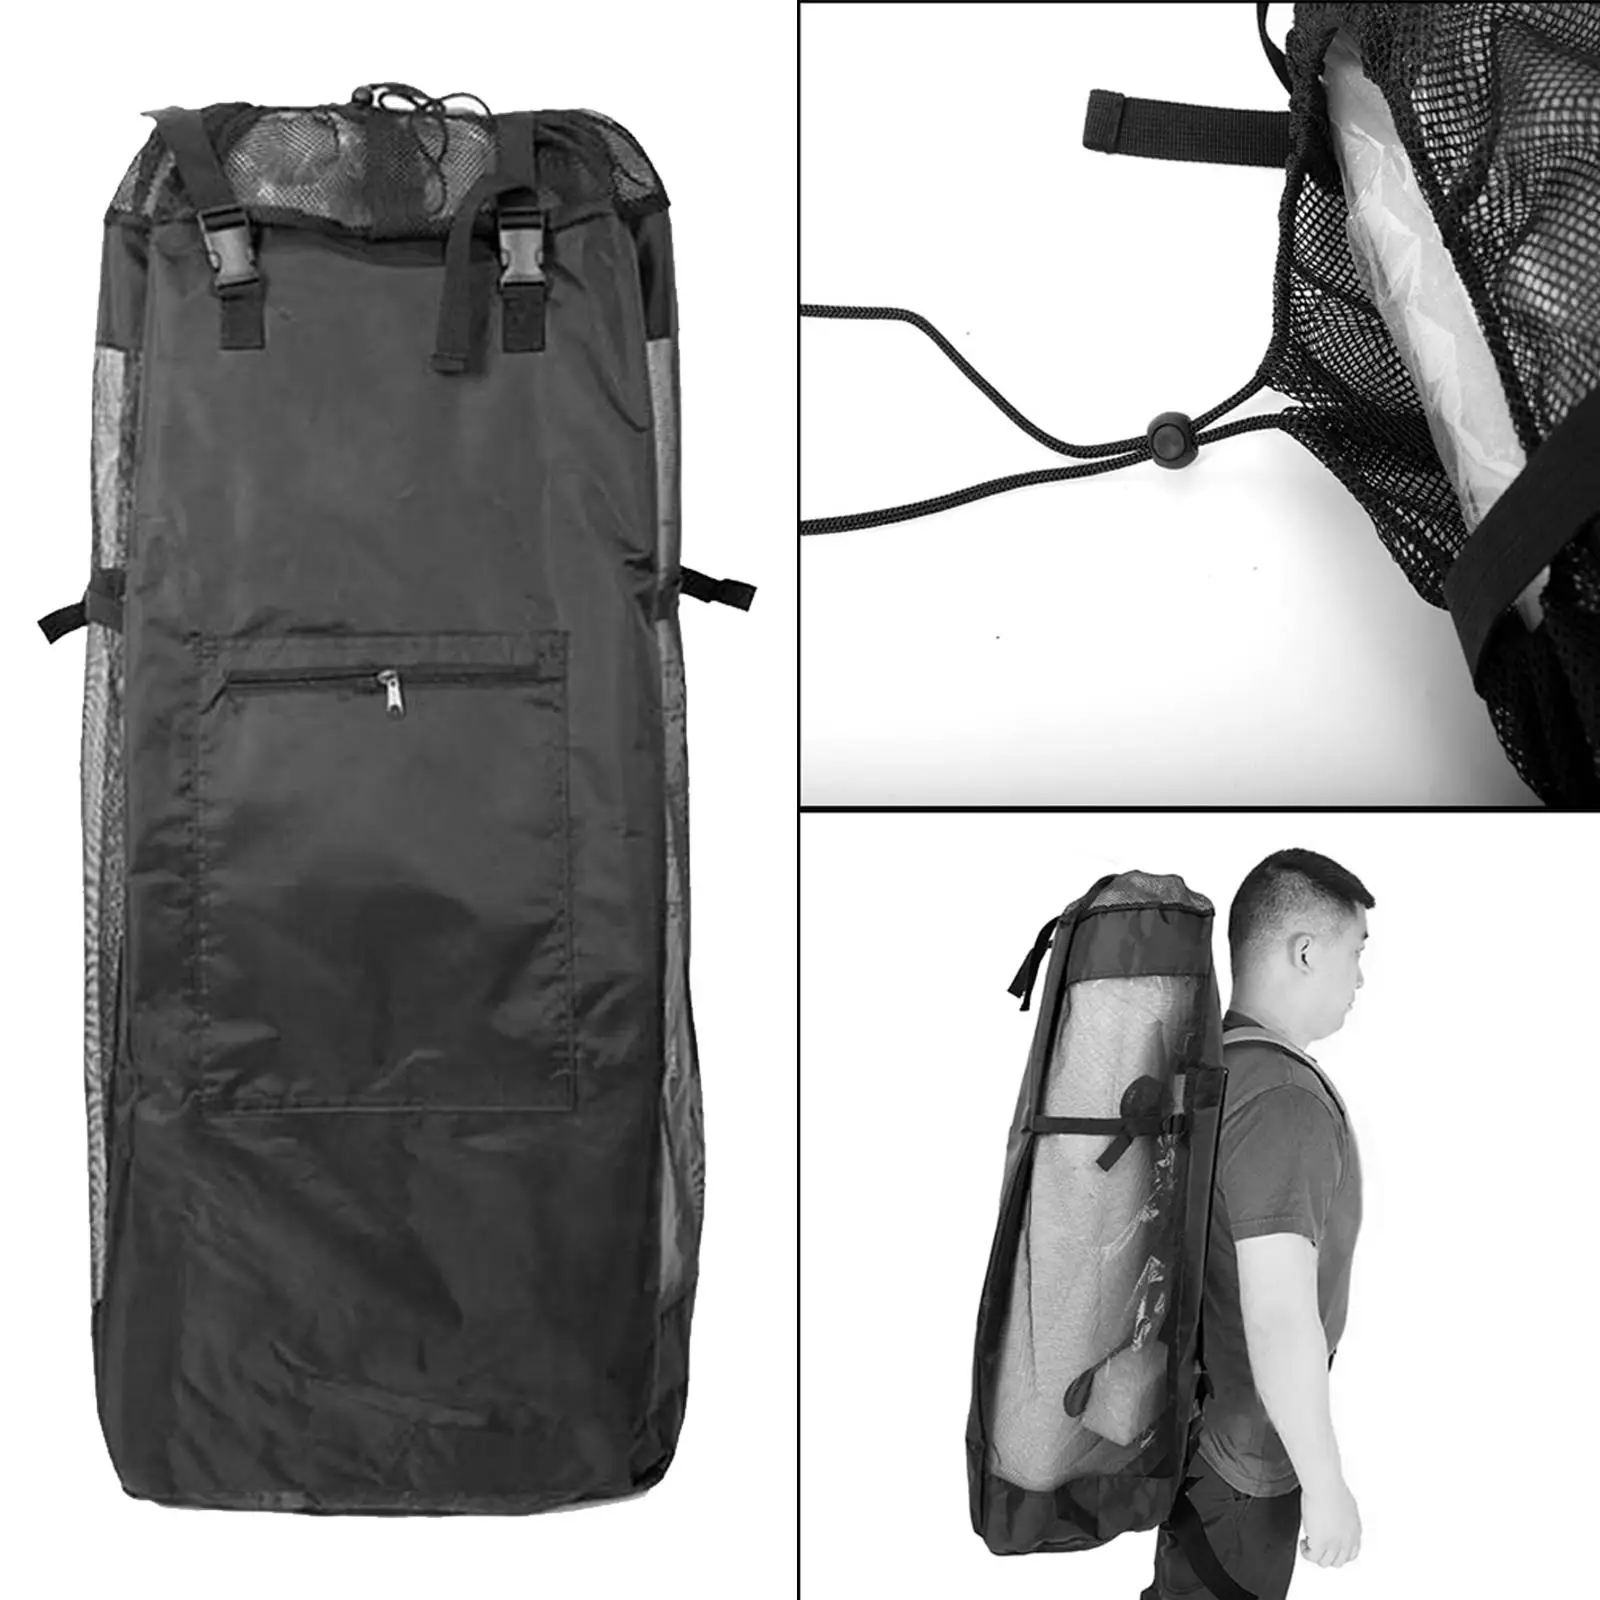 Universal Inflatable Paddleboard Backpack Accessories with Zipper Large Capacity